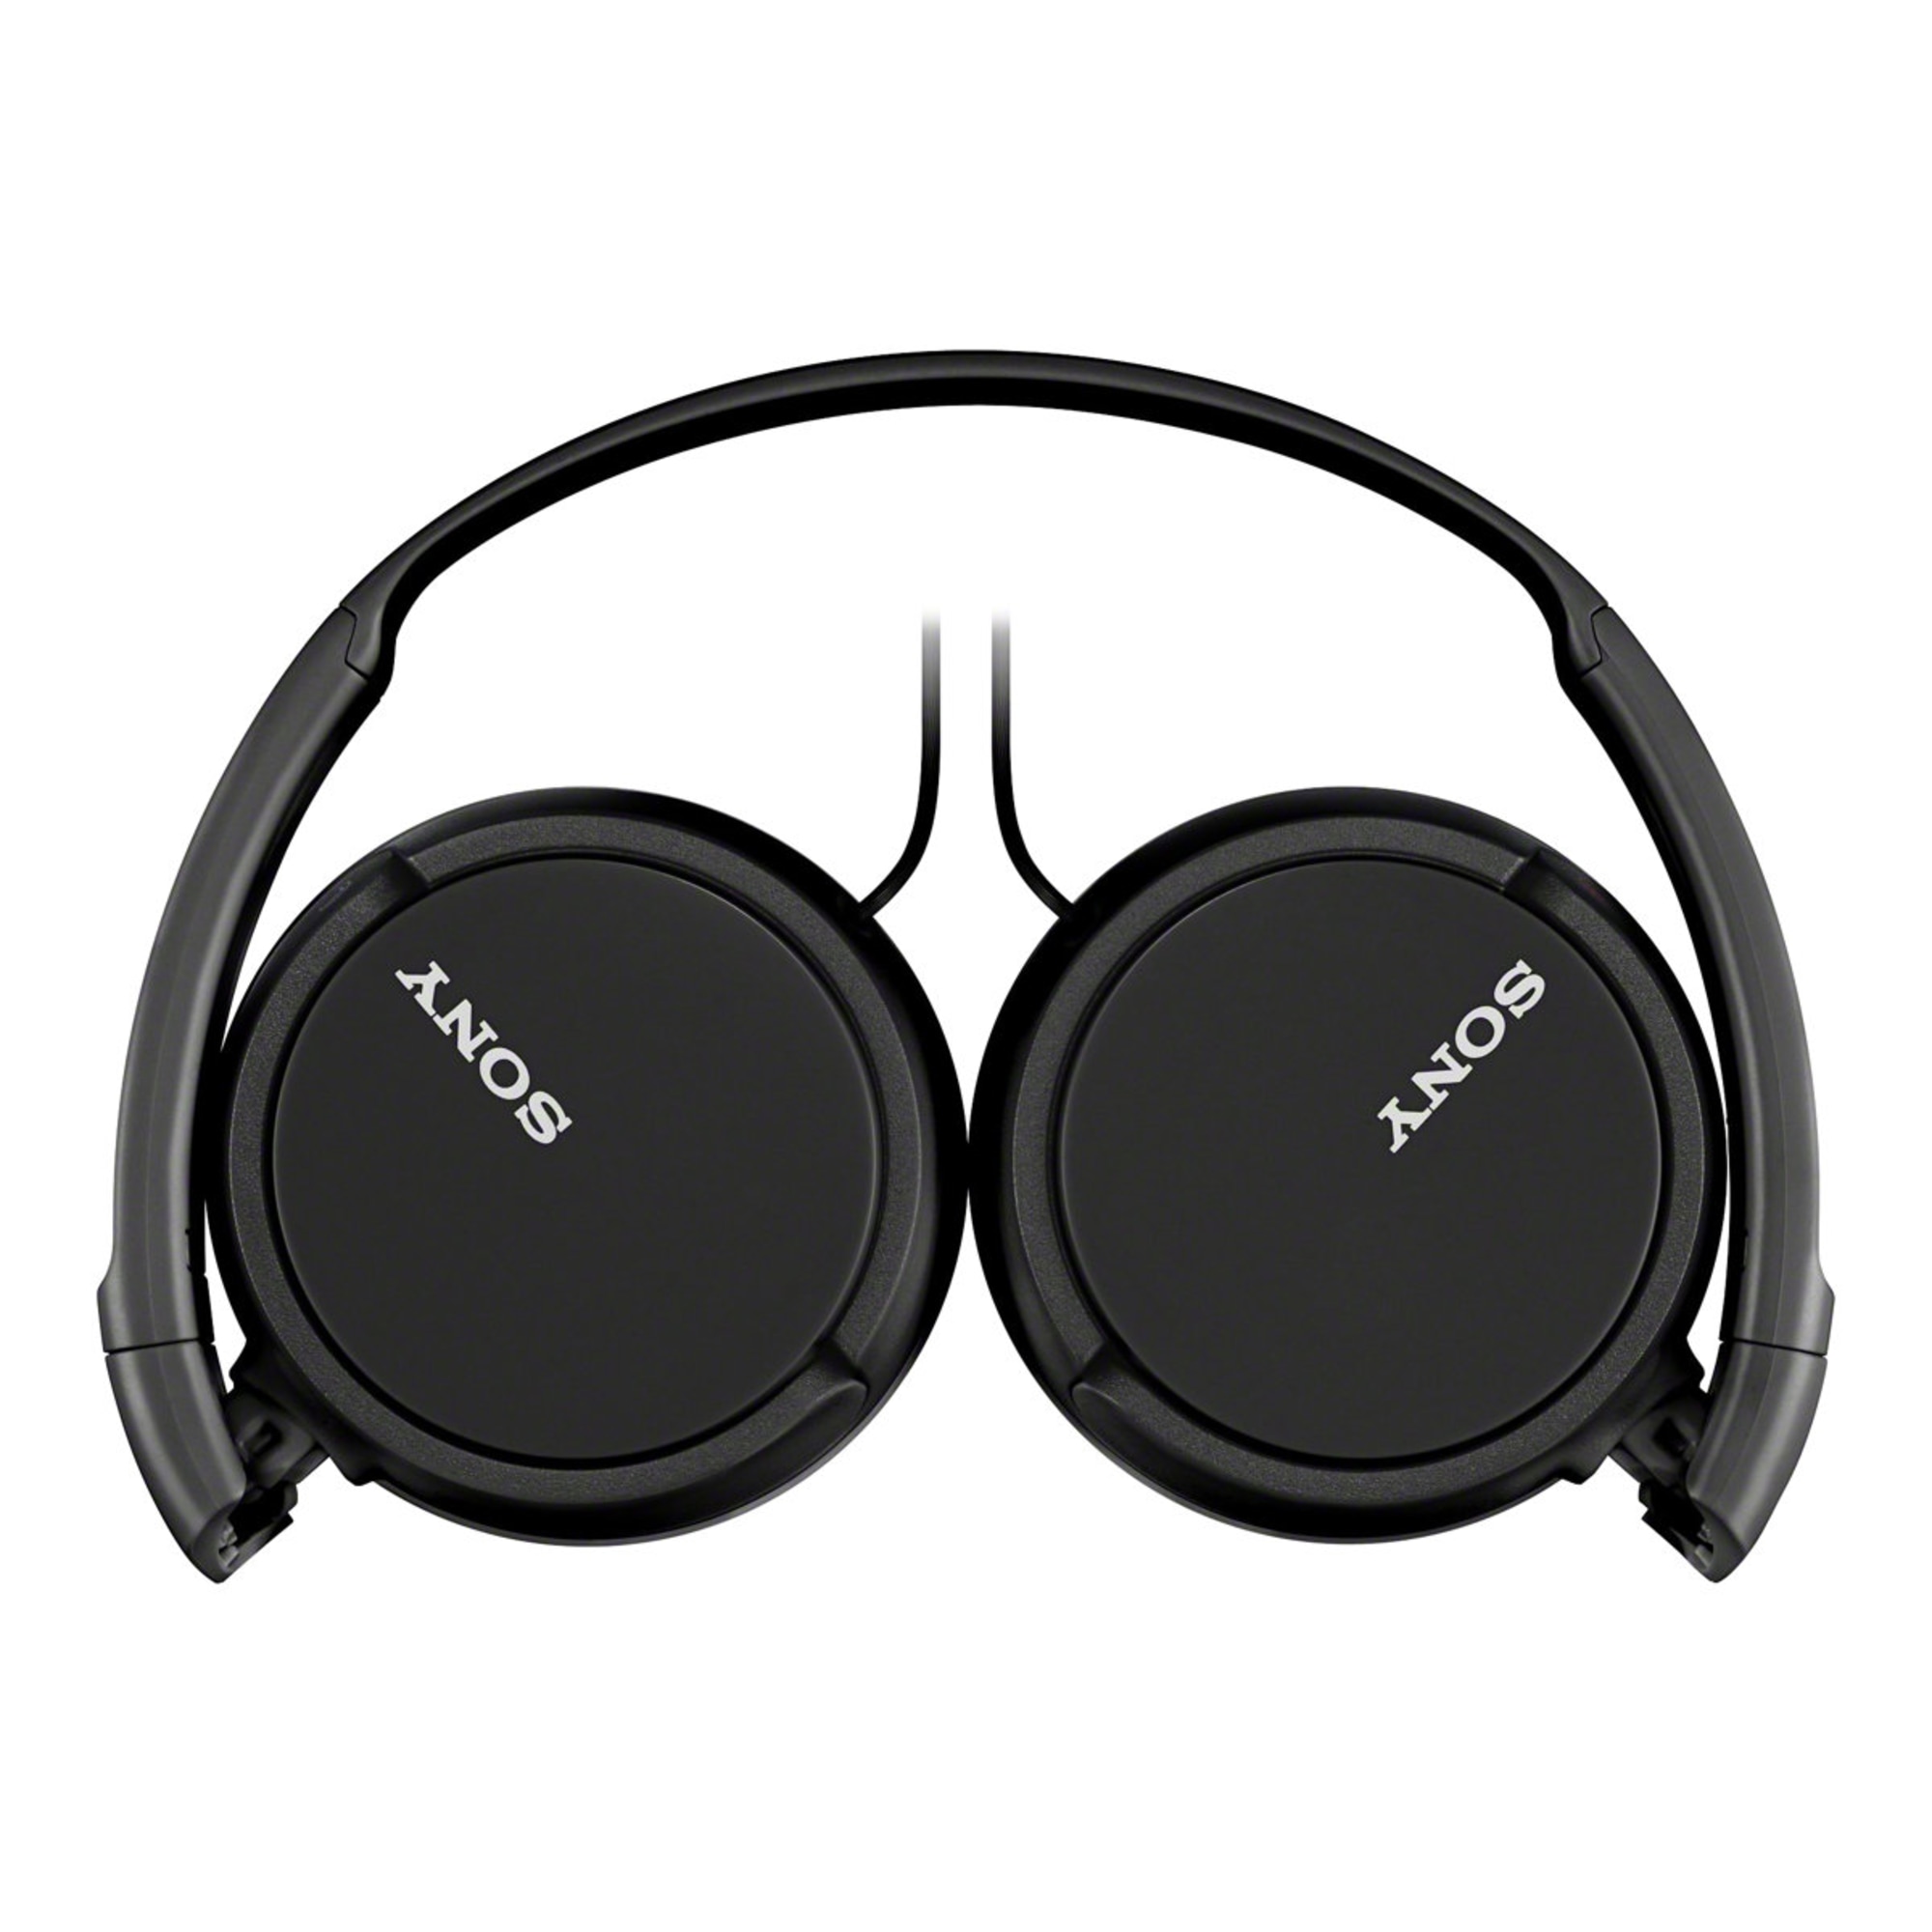 Sony MDR-ZX110AP EXTRA BASS Headphones with Mic- Black - image 1 of 3